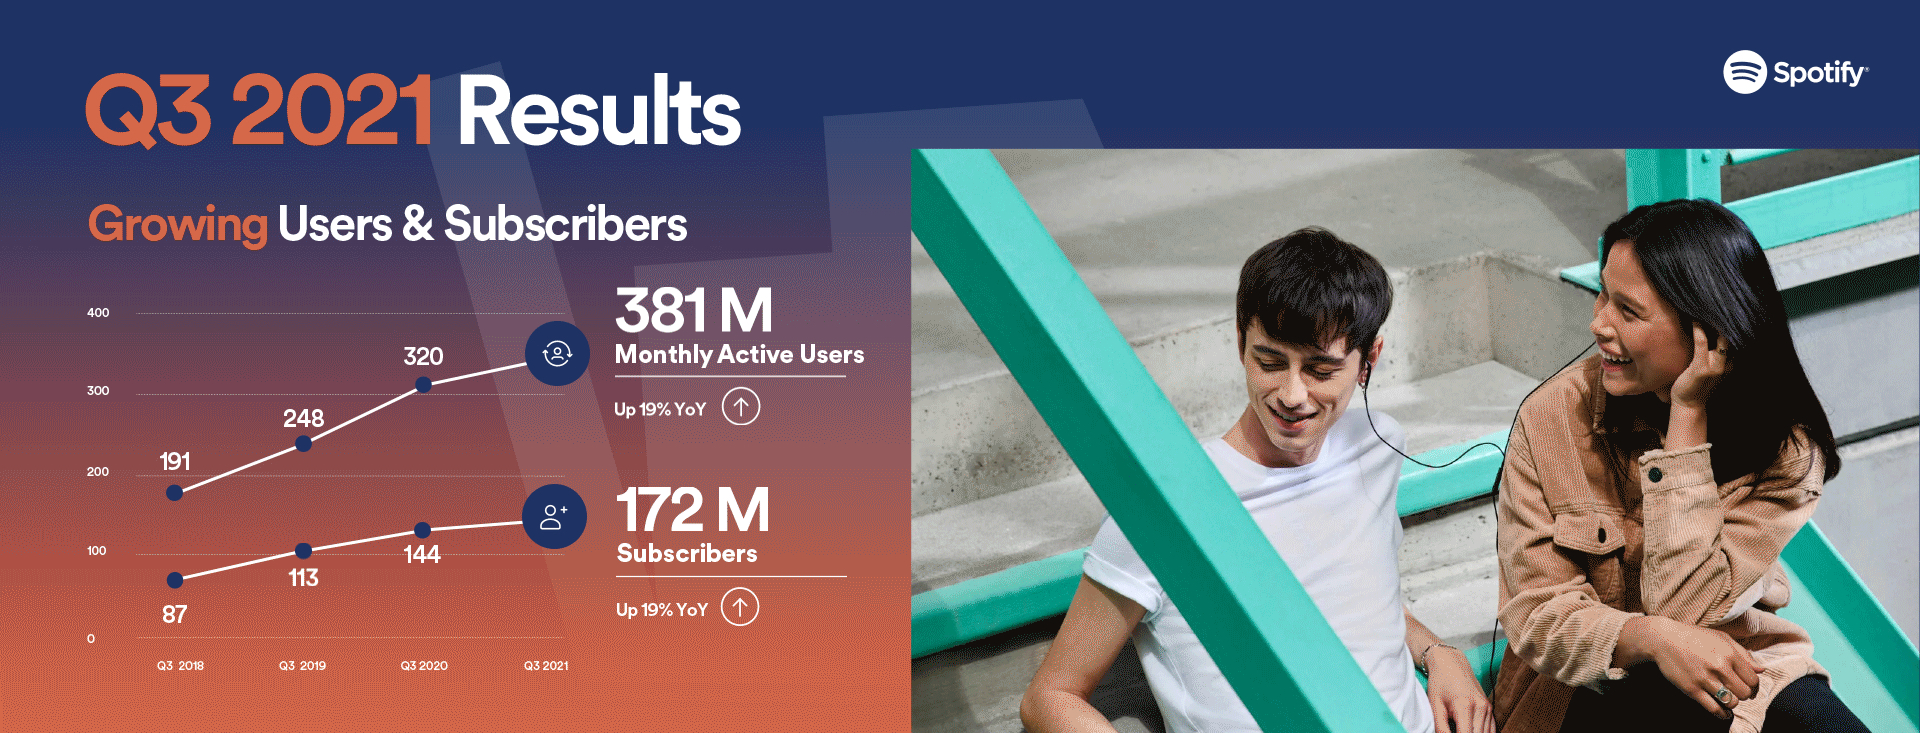 How many Free and Premium Spotify users are there? – Spotify’s Q3 2021 earnings reveal the latest stats